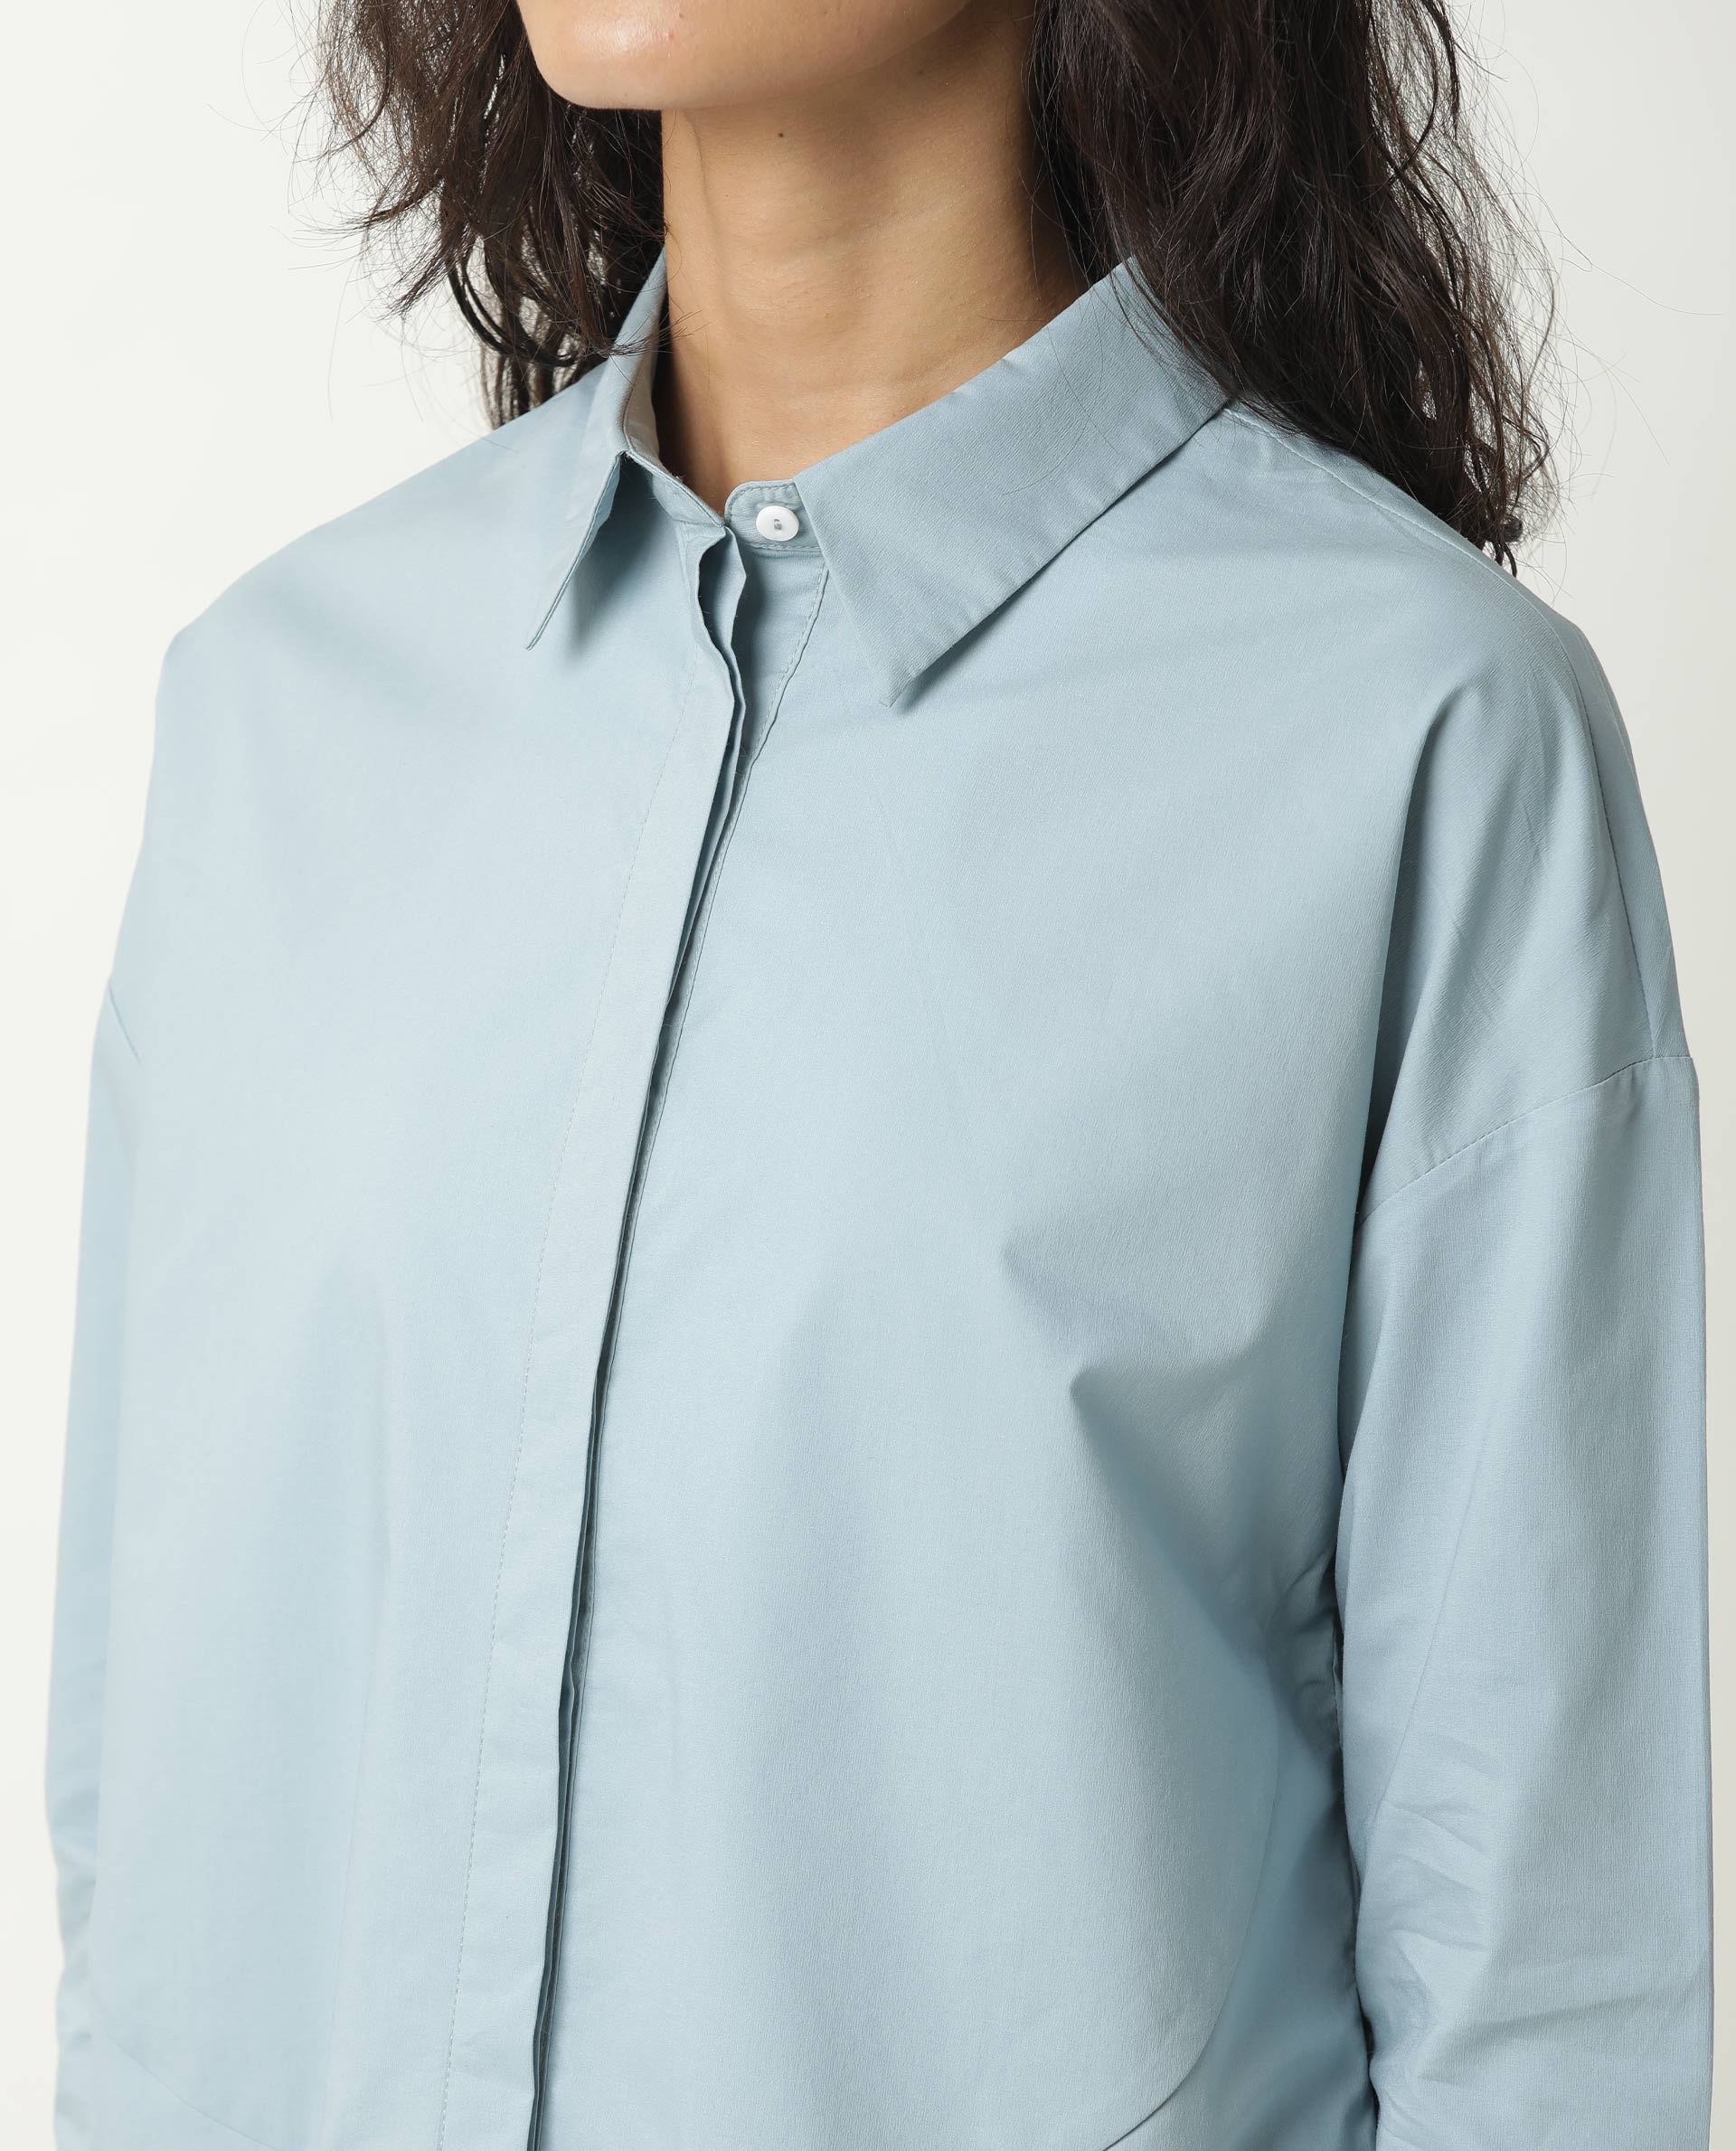 WOMENS ELEVEN BLUE TOP Polyester FABRIC Regular FIT 3/4 Sleeve Collared Neck